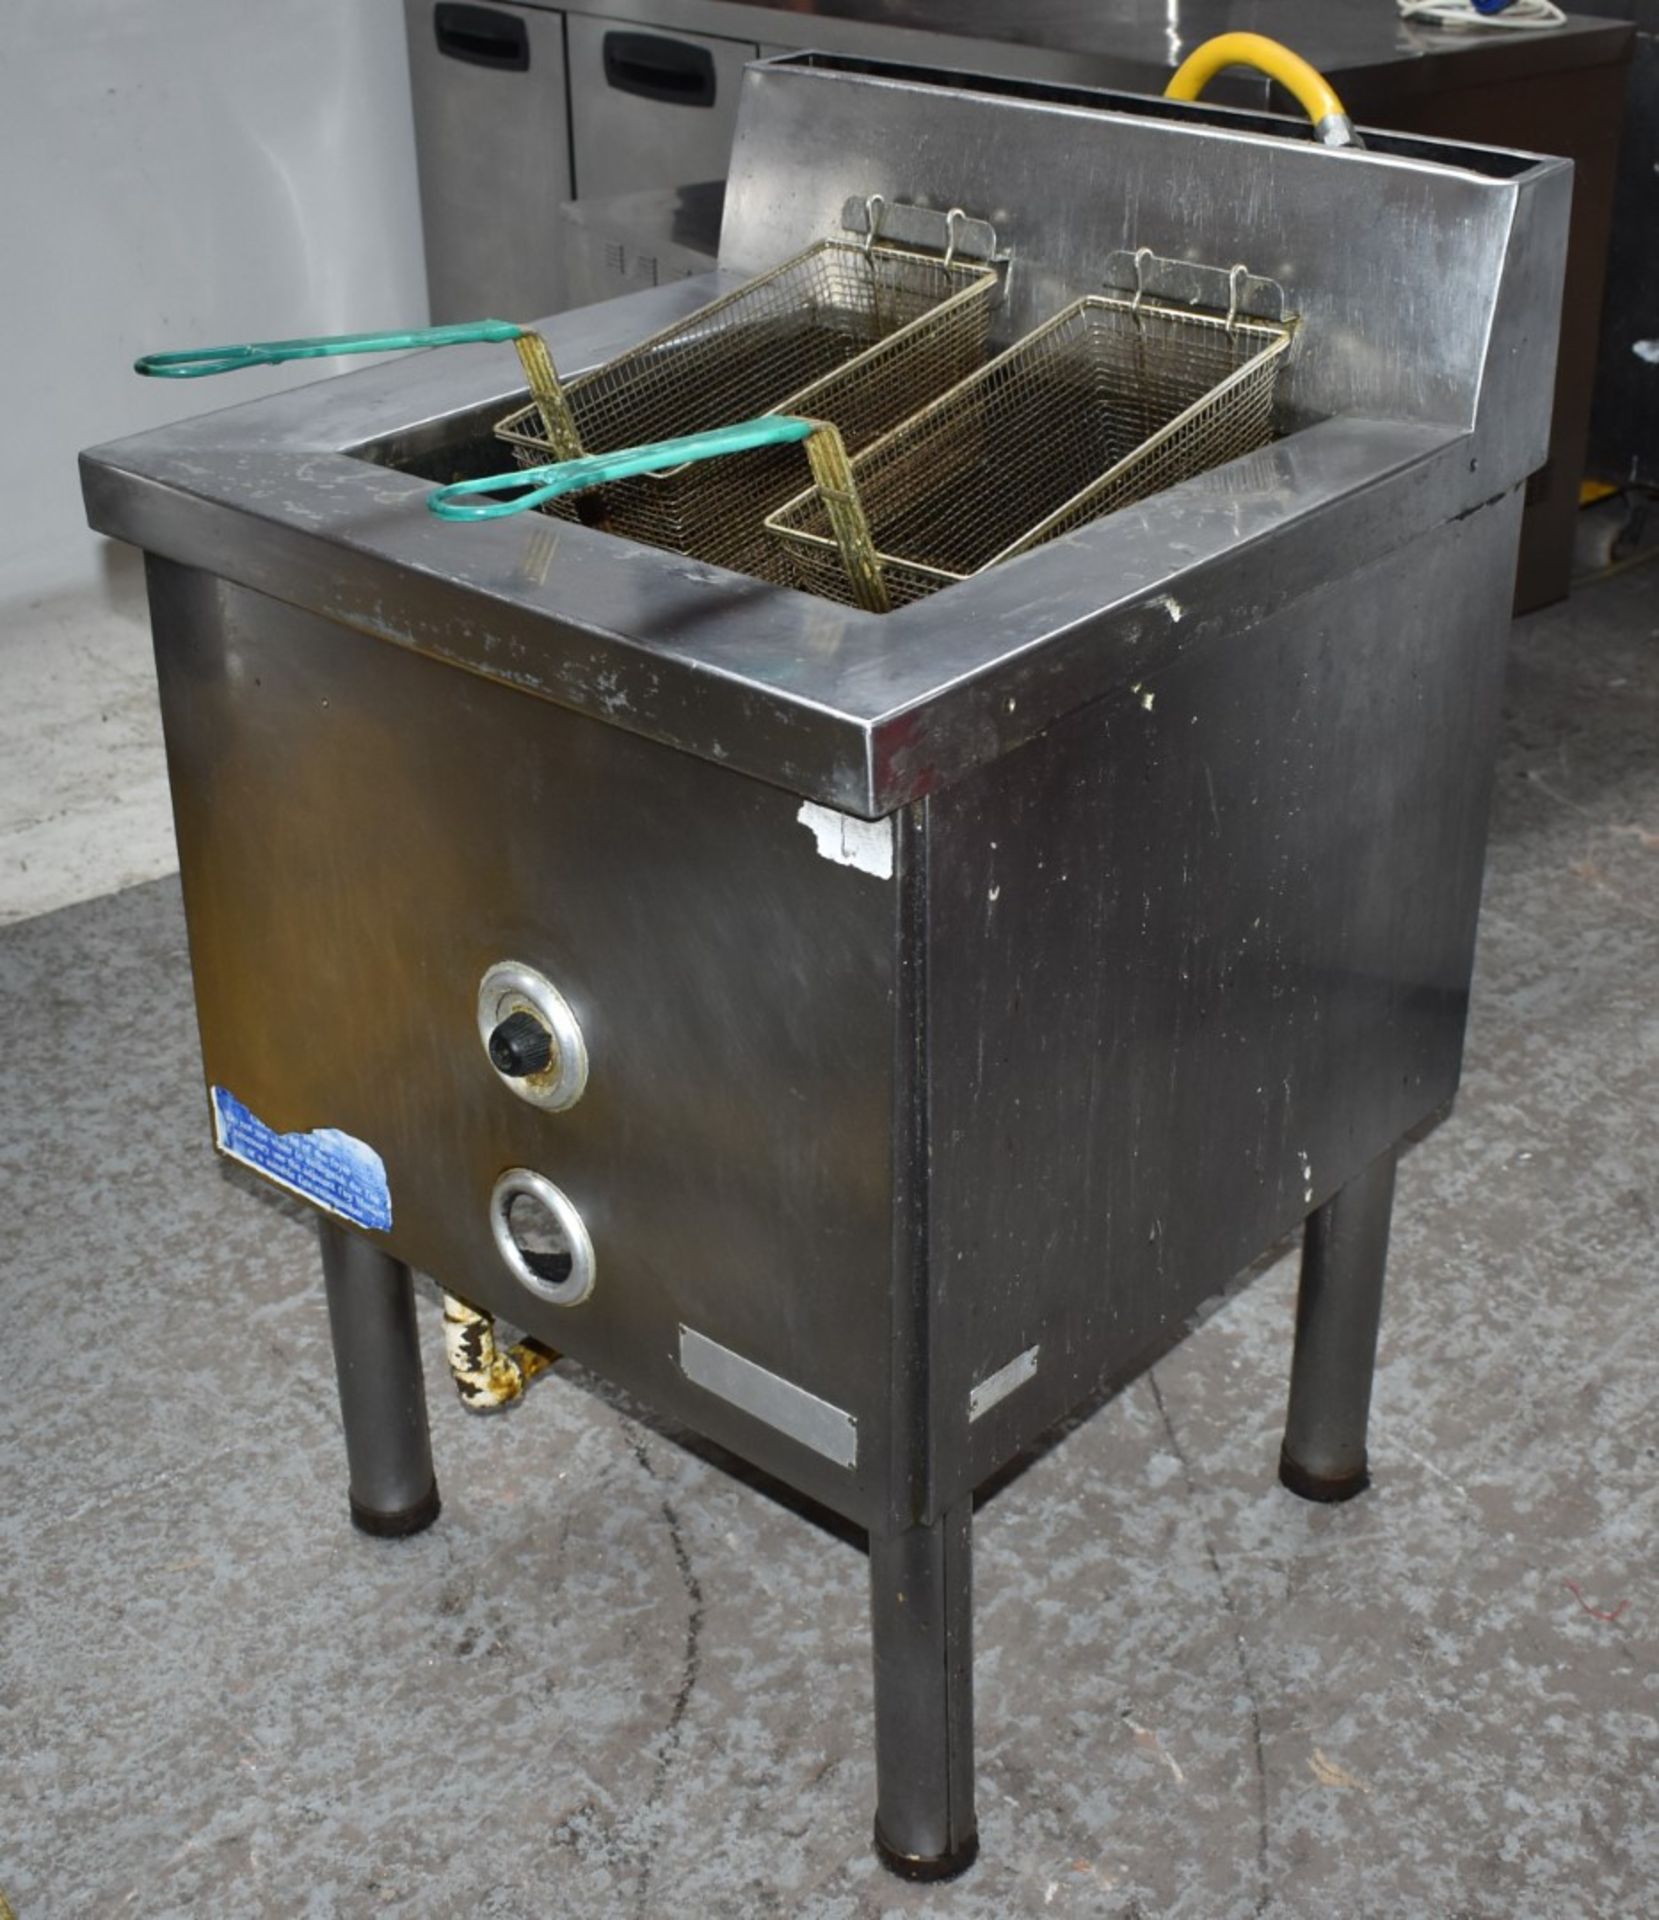 1 x Twin Basket Natural Gas Fryer With Stainless Steel Finish - H89 x W65.5 x D70 cms - CL459 - - Image 3 of 7